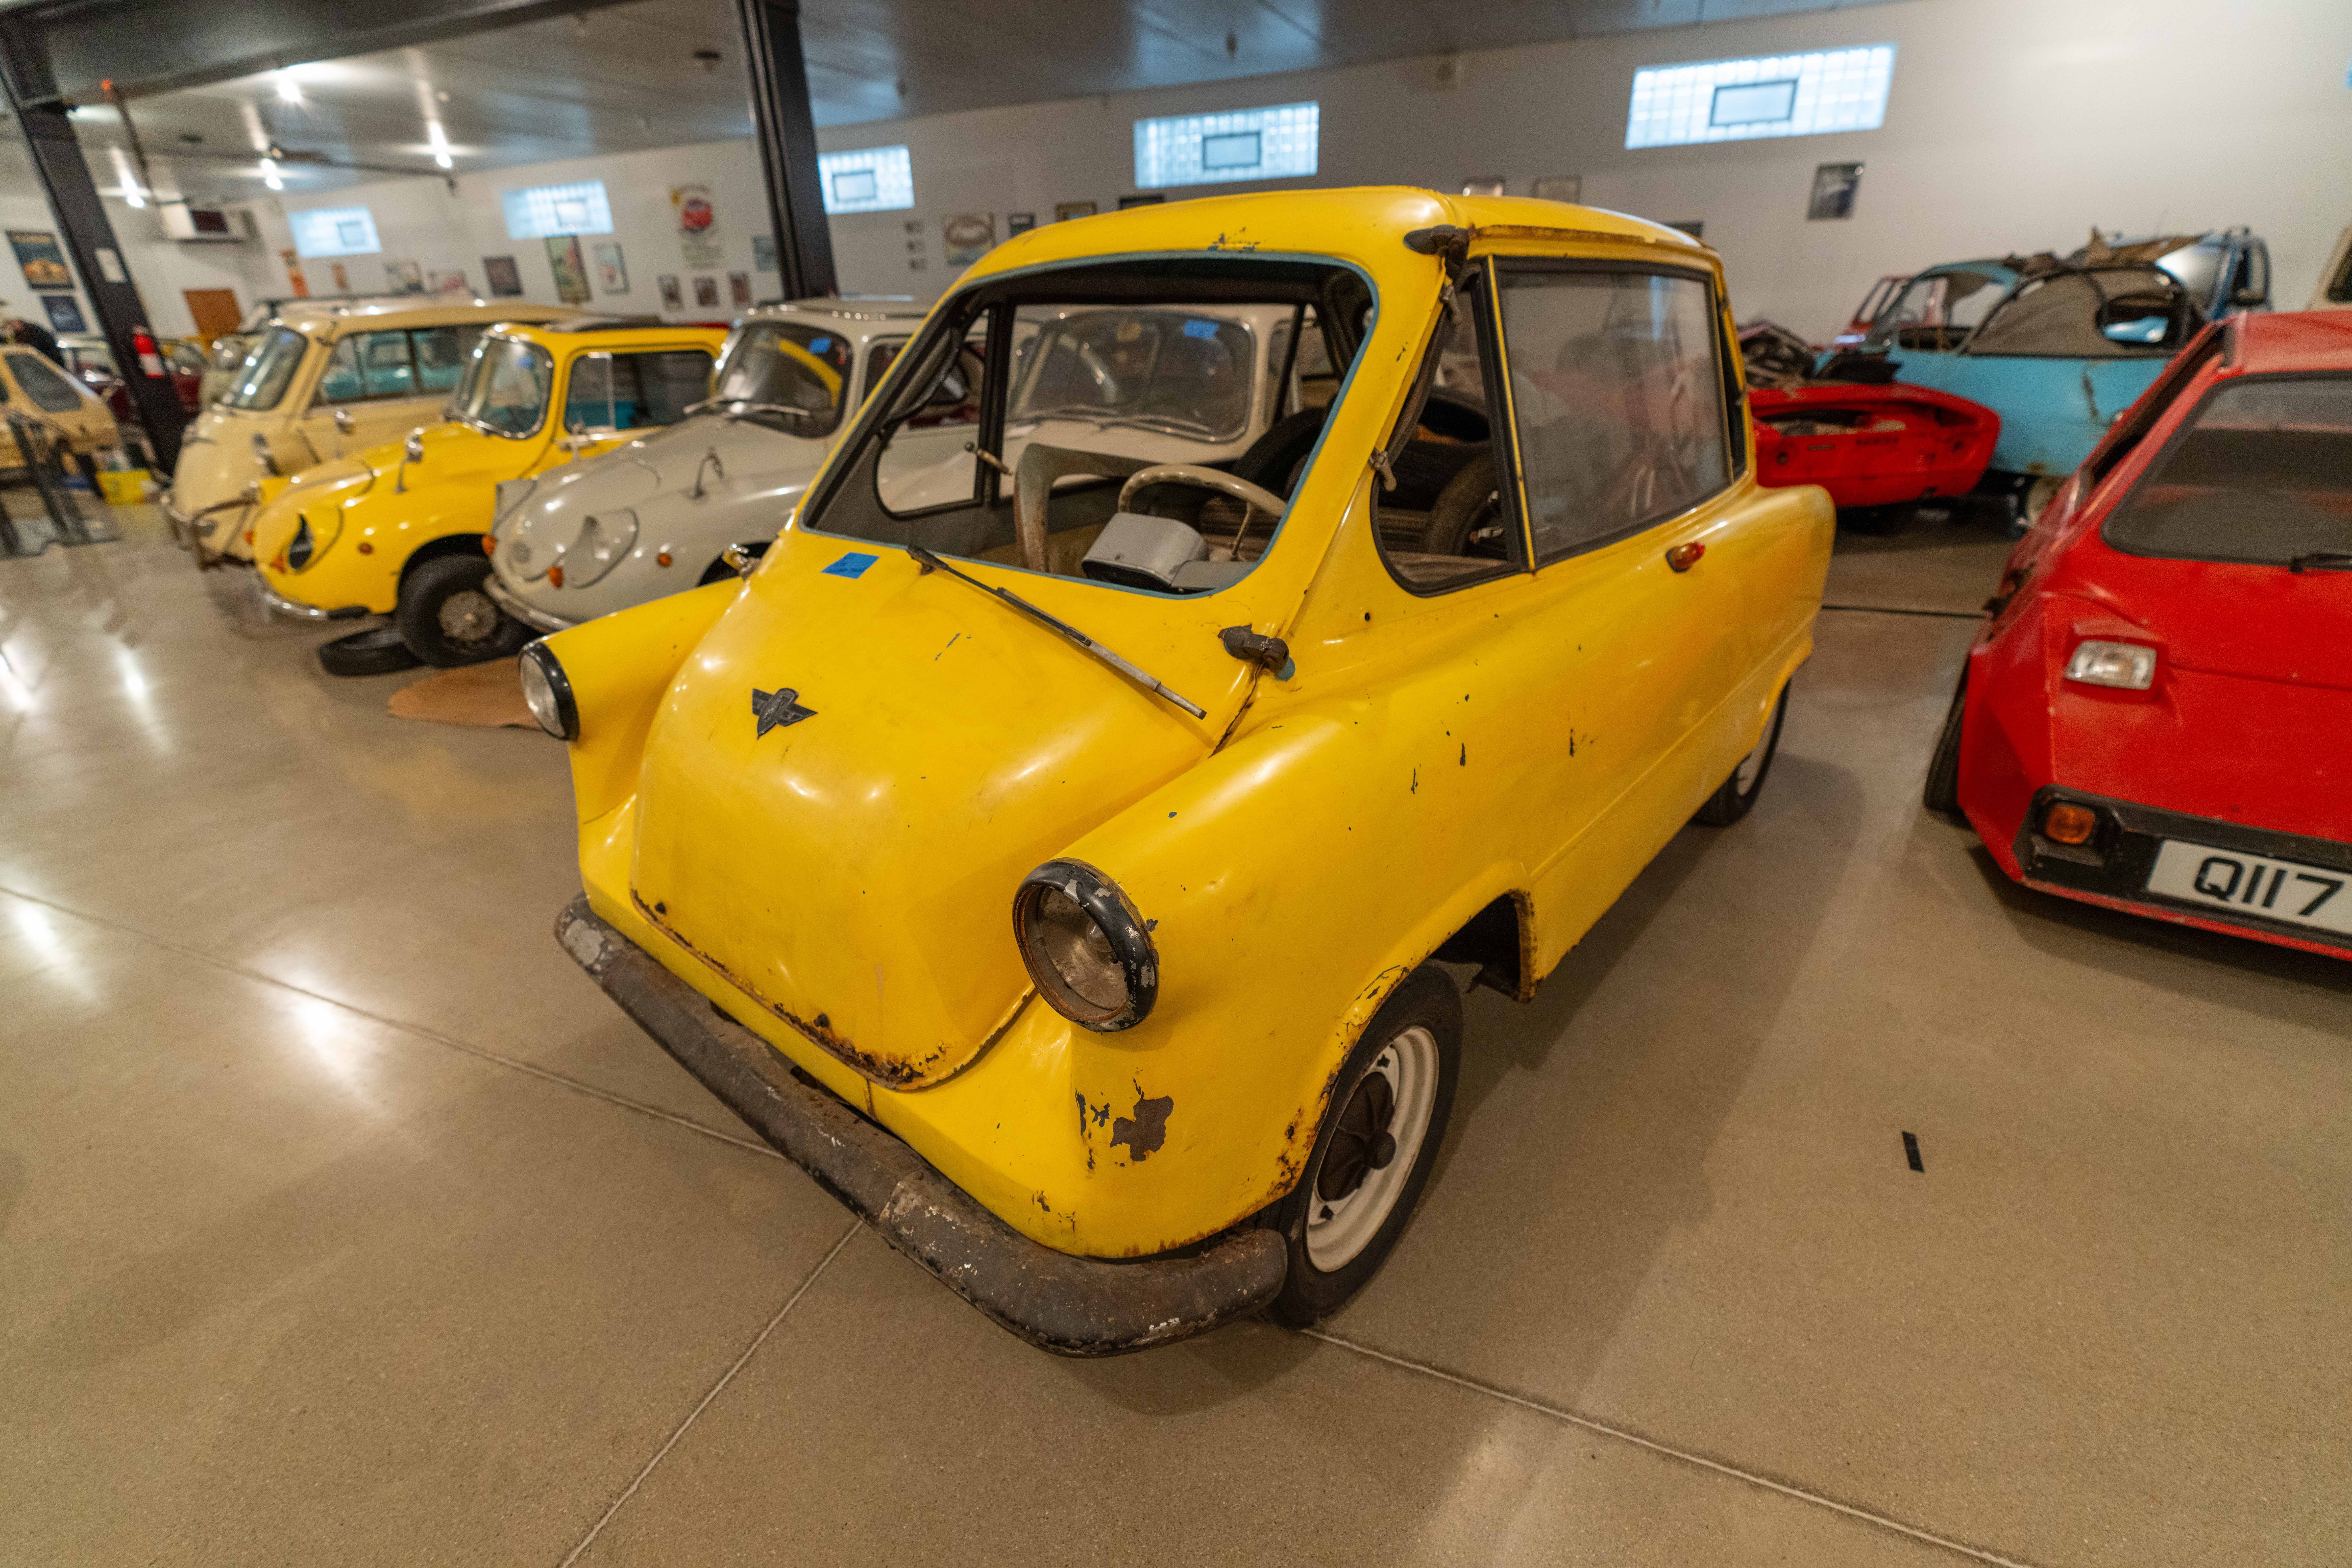 Vintage Micro Car Collection Proves Good Things Come in Small Packages